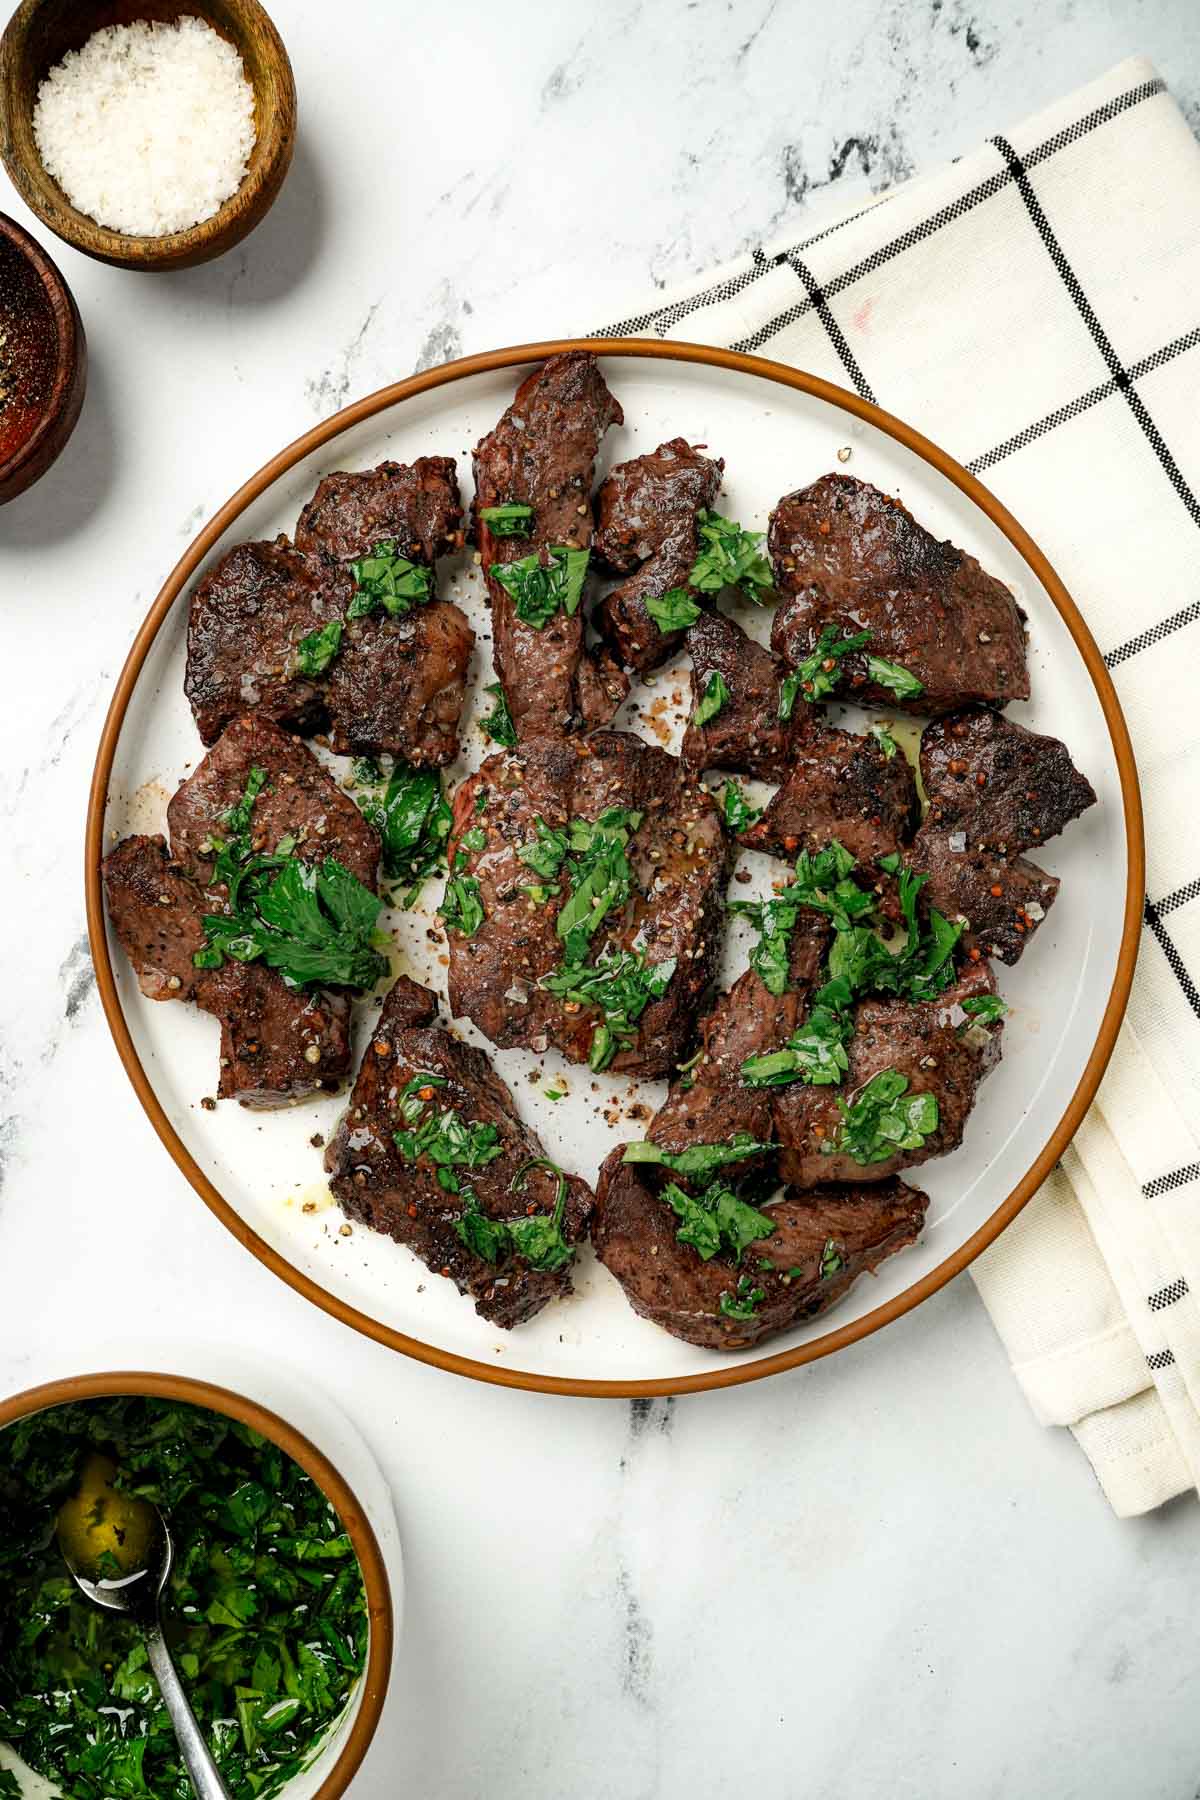 Slices of beef heart on a plate with green herbs